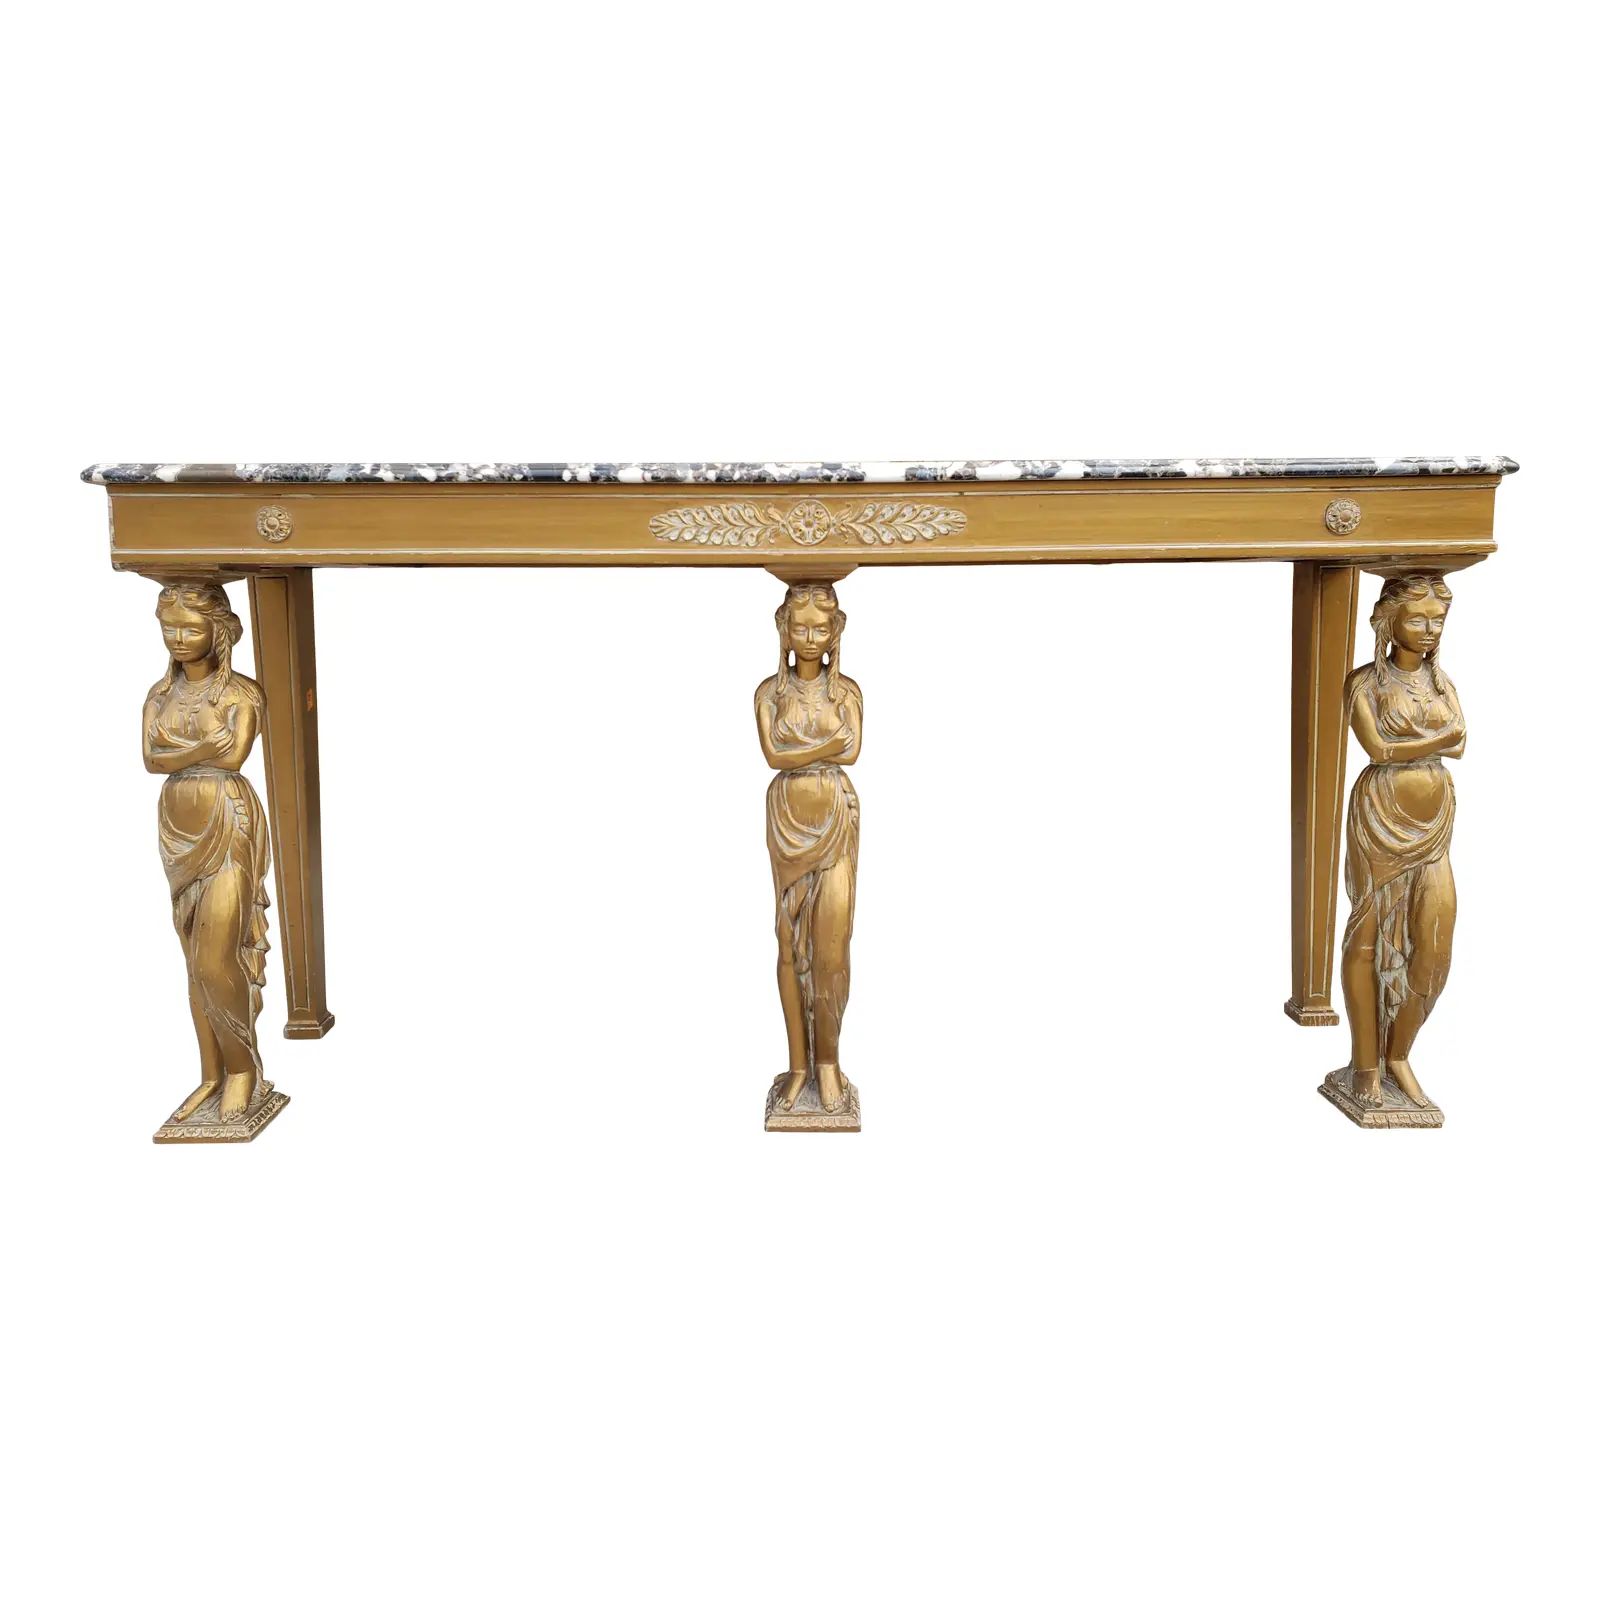 Antique Neoclassical Style Giltwood & Marble Top Console Table | Chairish